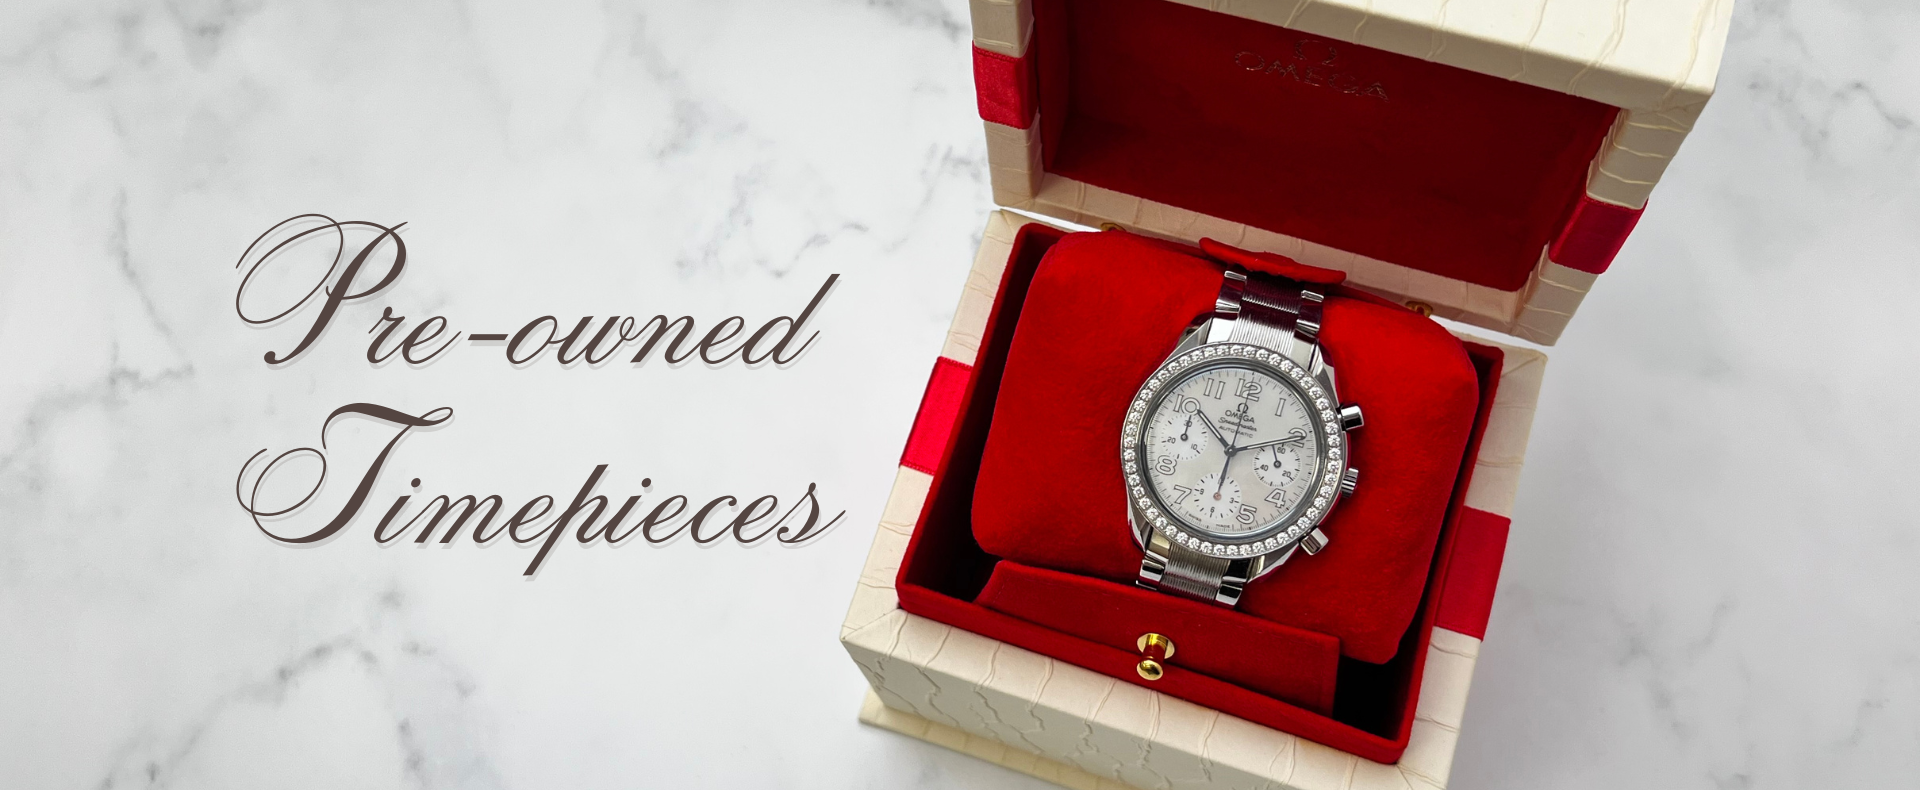 Pre-owned Timepieces